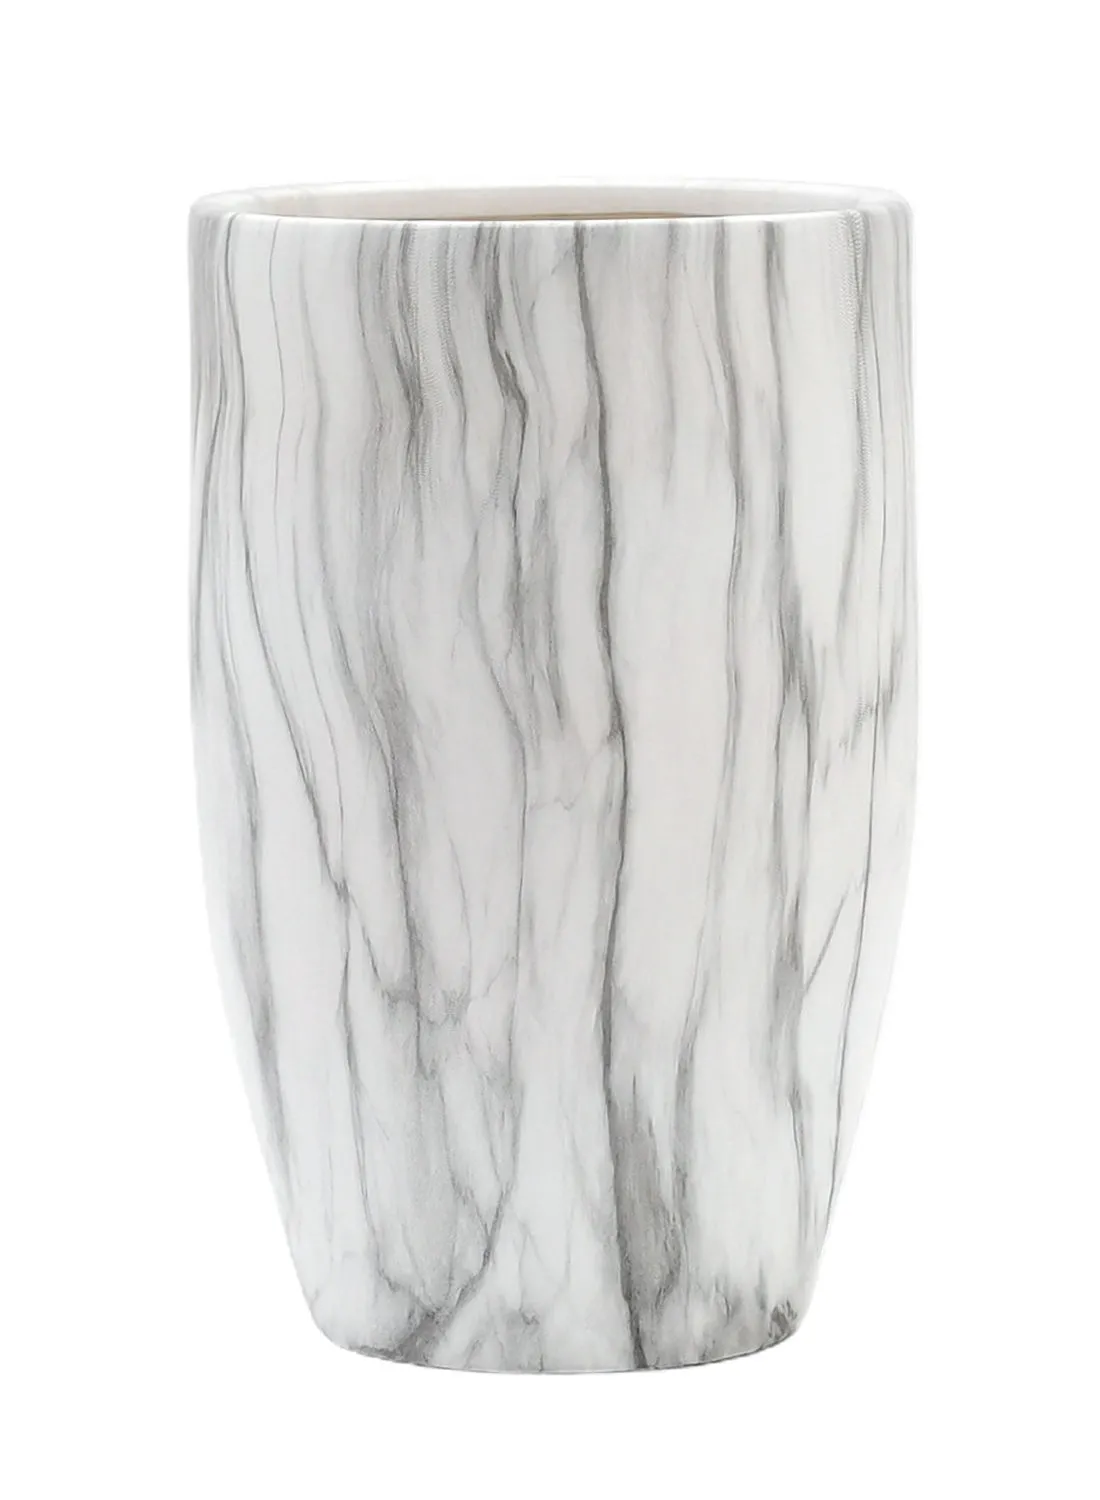 ebb & flow Natural Marble Design Ceramic Vase Unique Luxury Quality Material For The Perfect Stylish Home N13-026 White 22 x 34cm